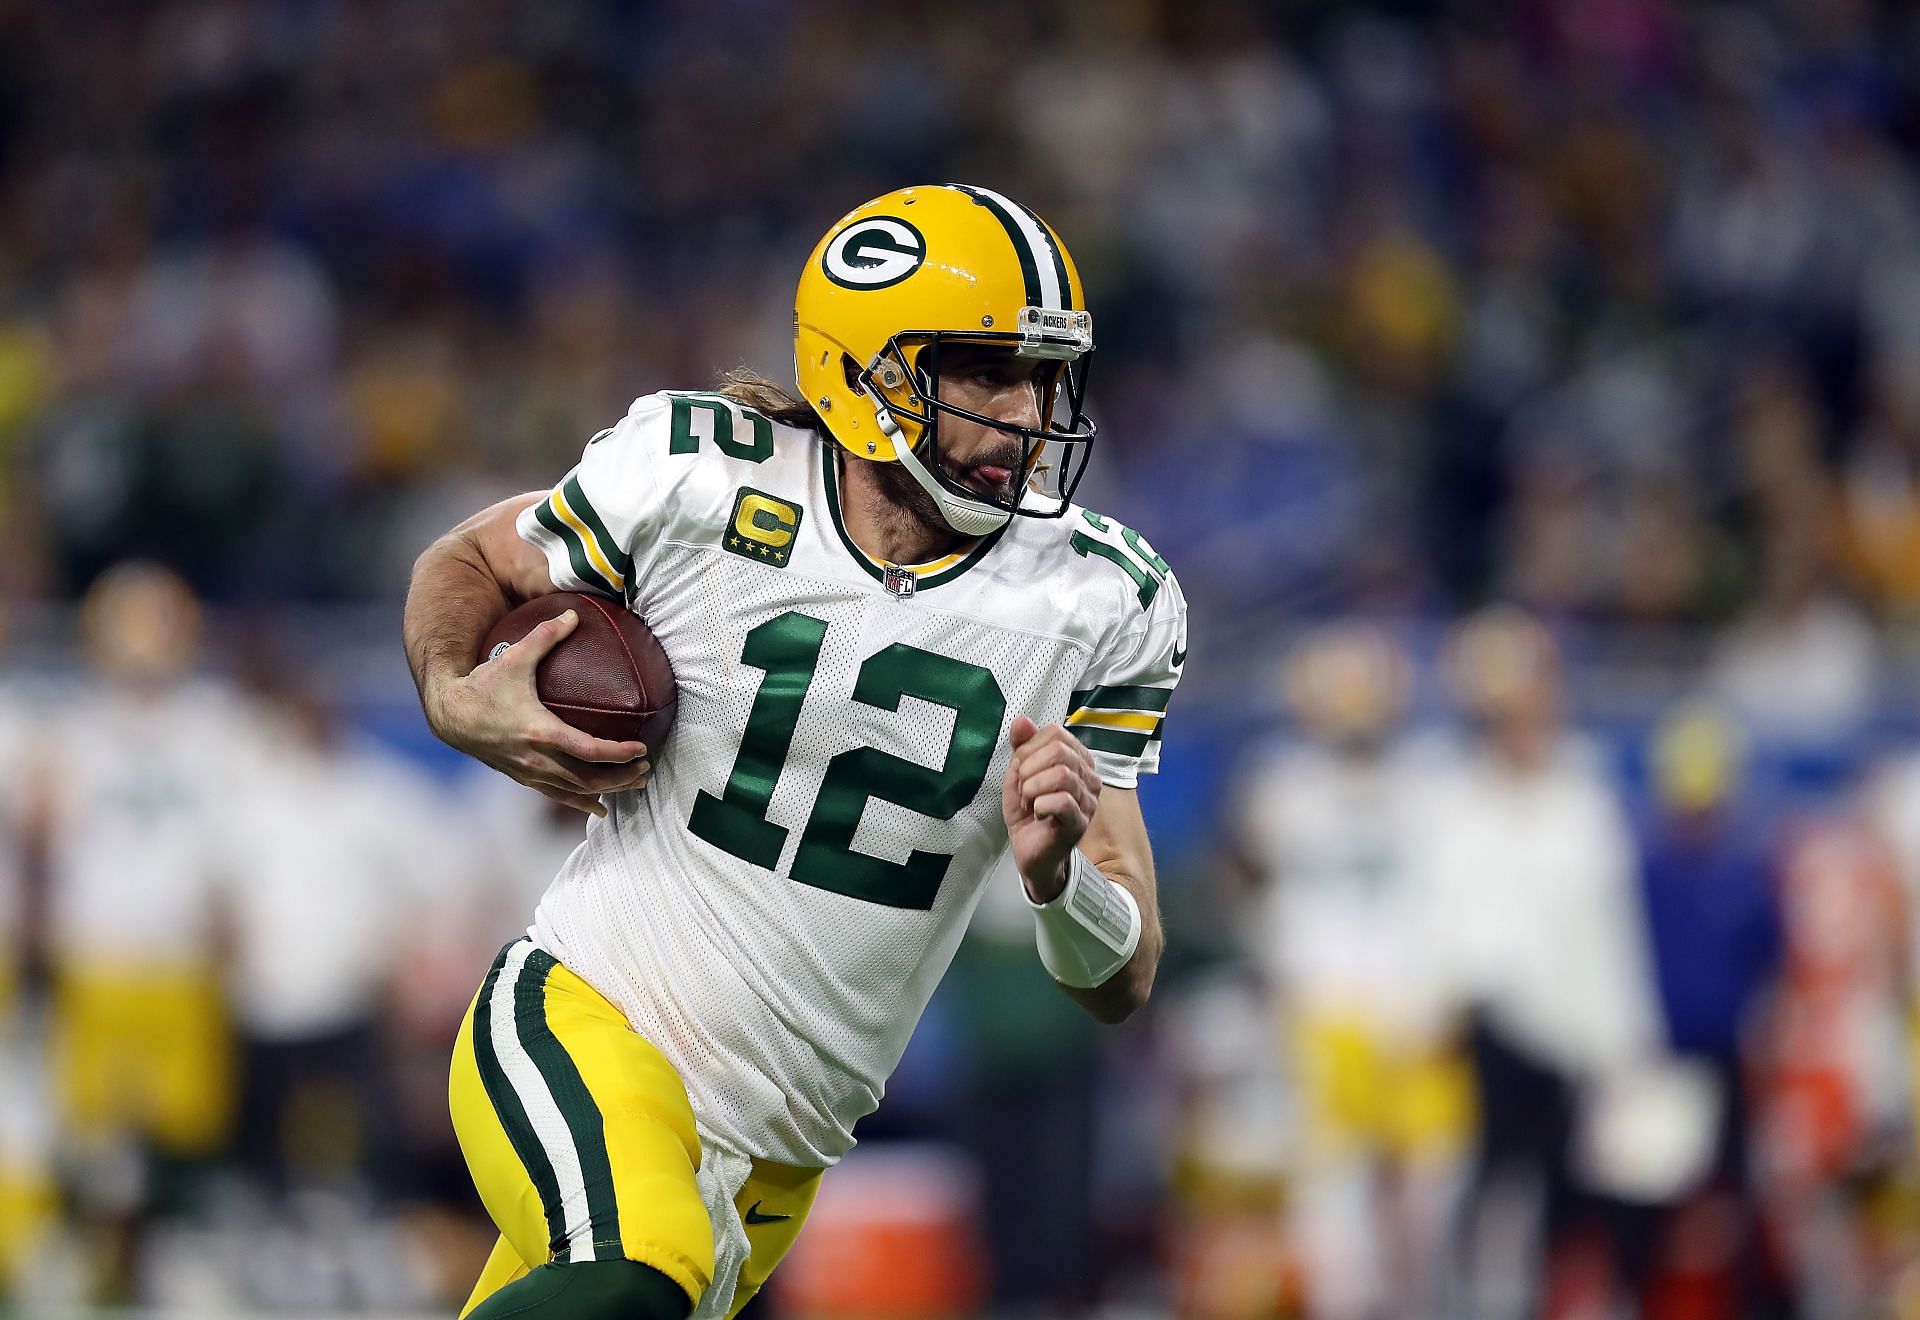 Rodgers and the Packers host the 49ers at Lambeau Field